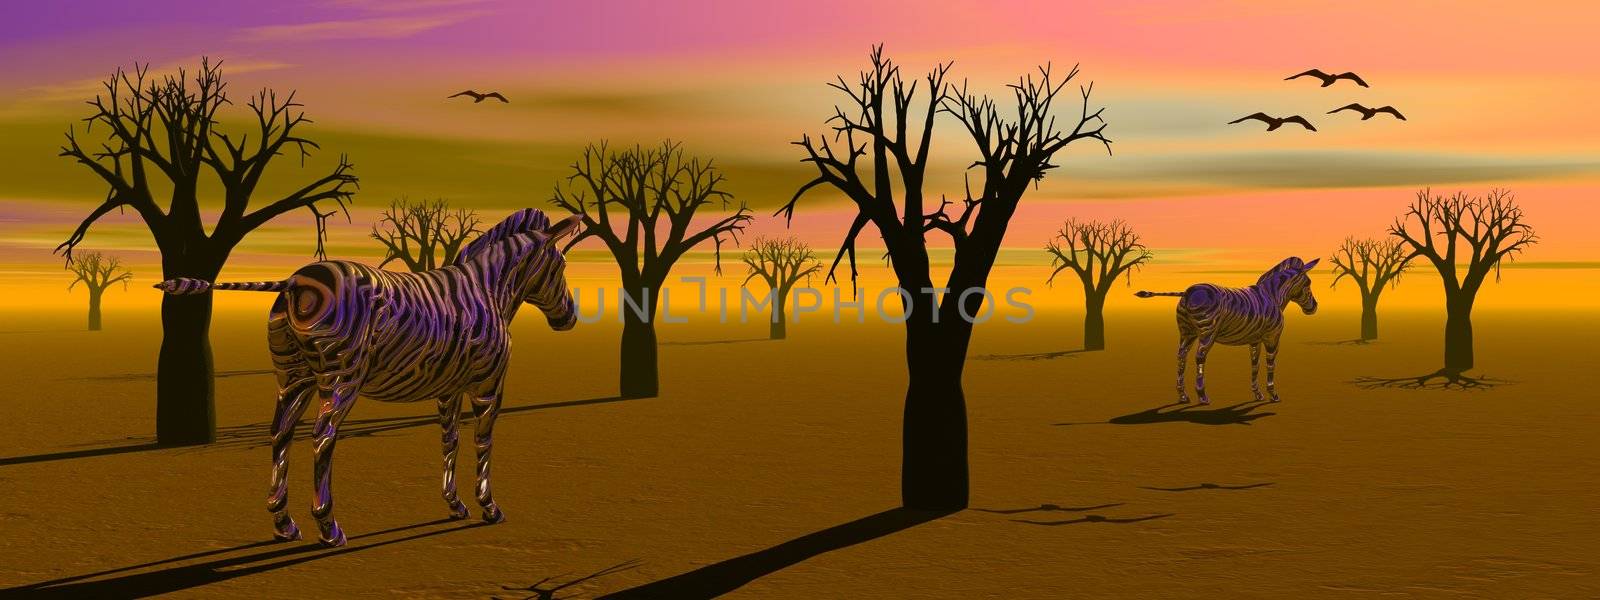 Desert with lots of baobab trees, birds and zebras ba sunset